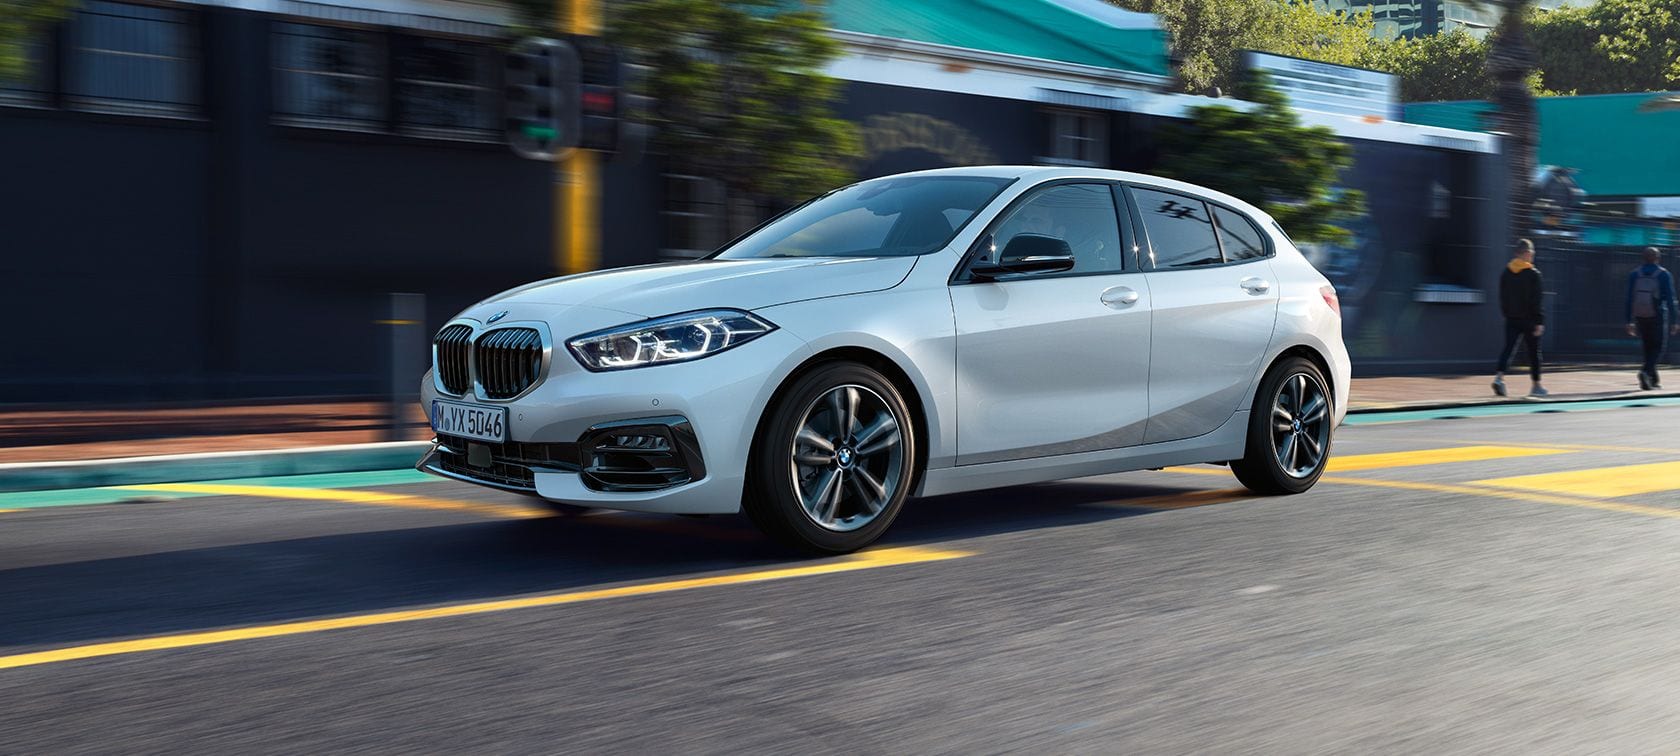 Image of the BMW 1 Series model